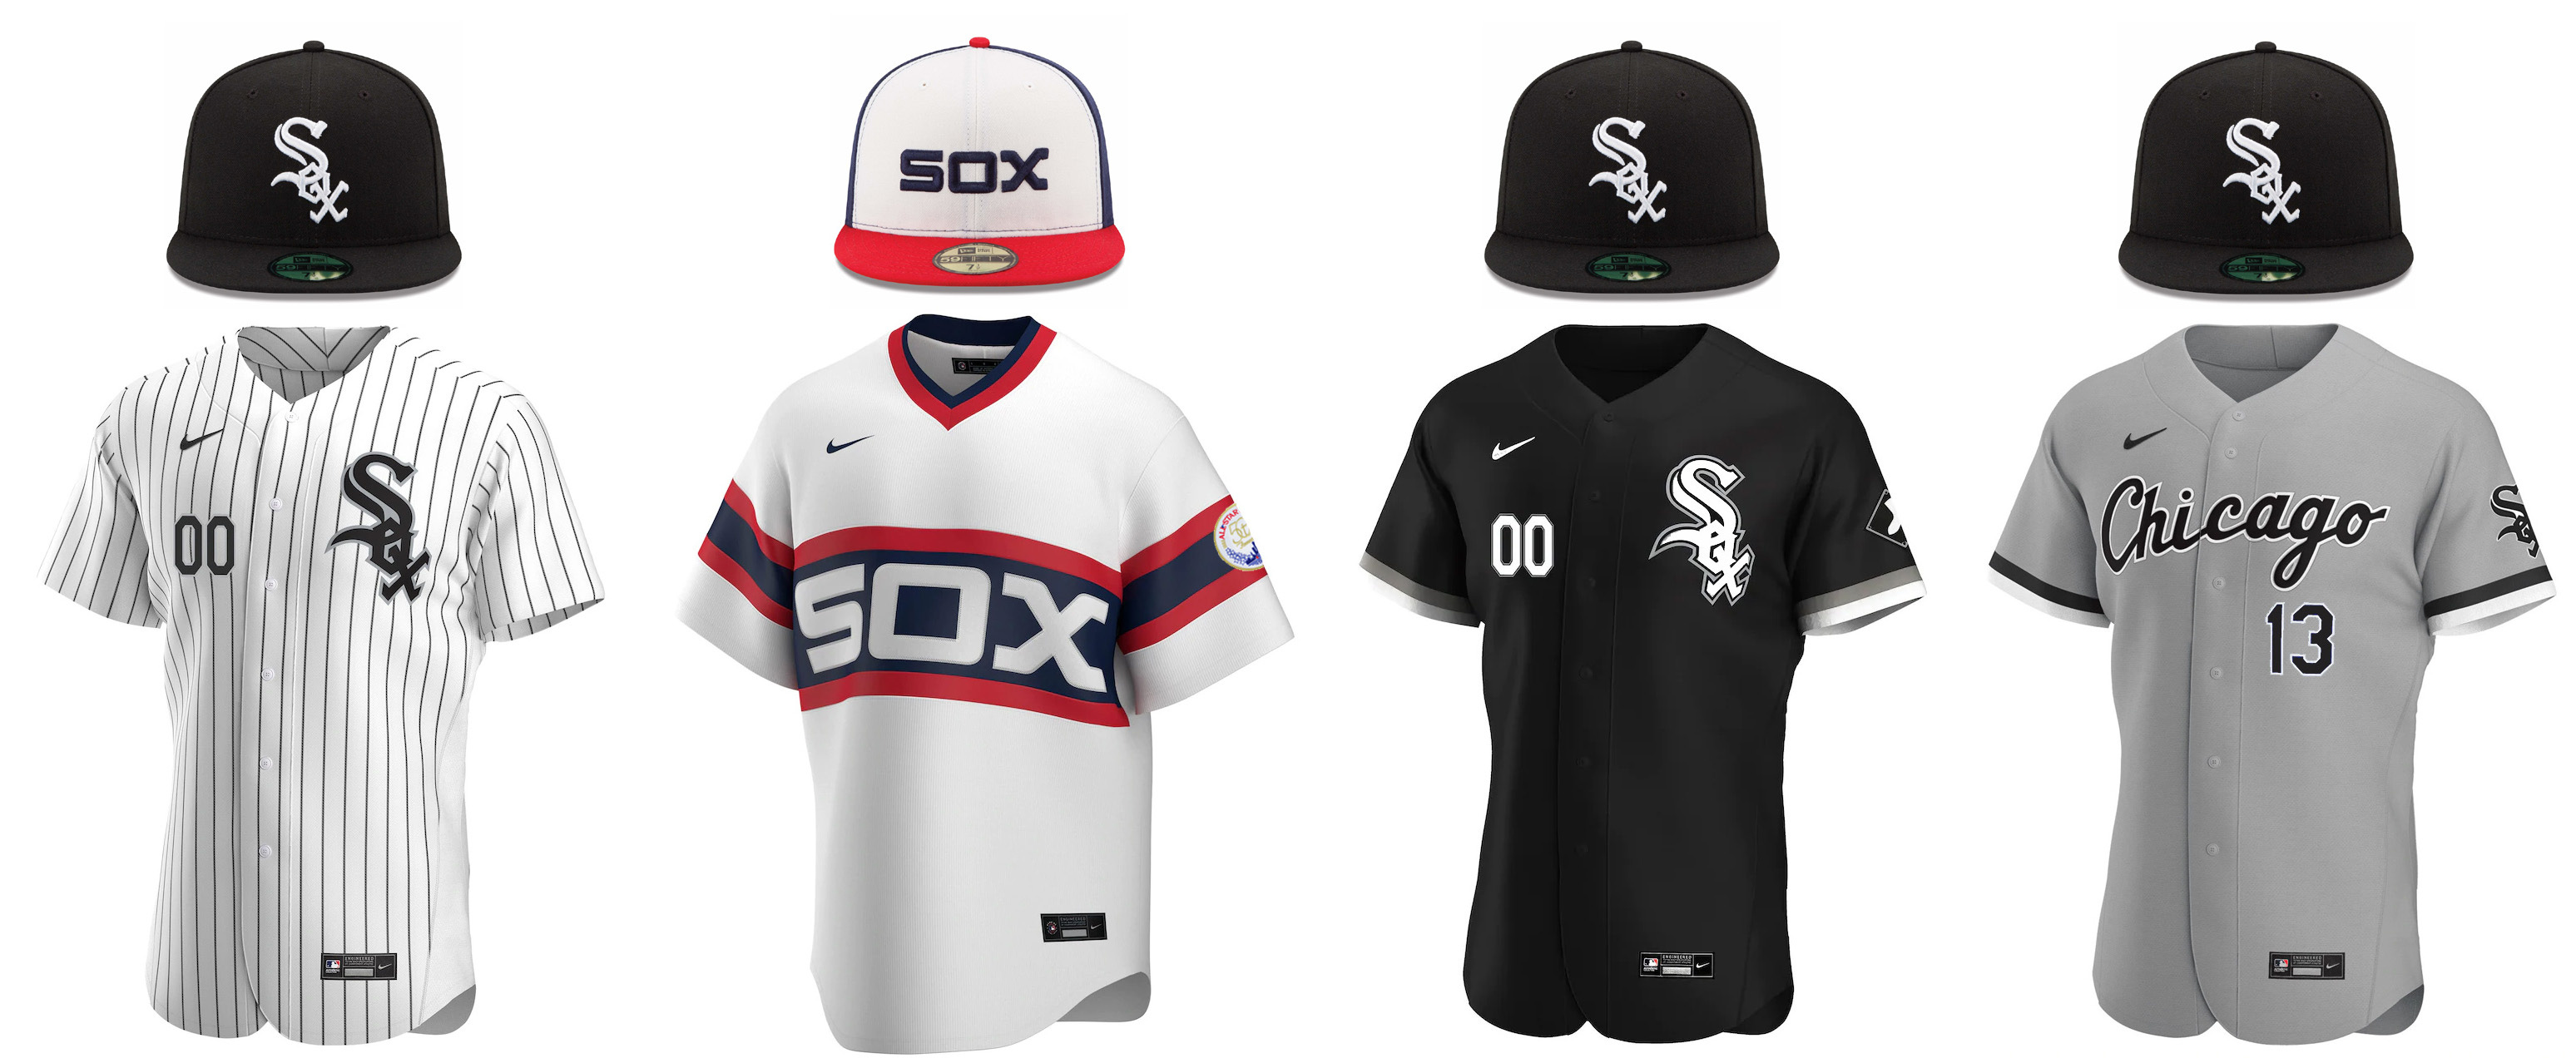 I love the current White Sox logo and uniform, cleanest in MLB. The home  whites look so good. I only wish these were the road jersey logos. Seems to  work better in